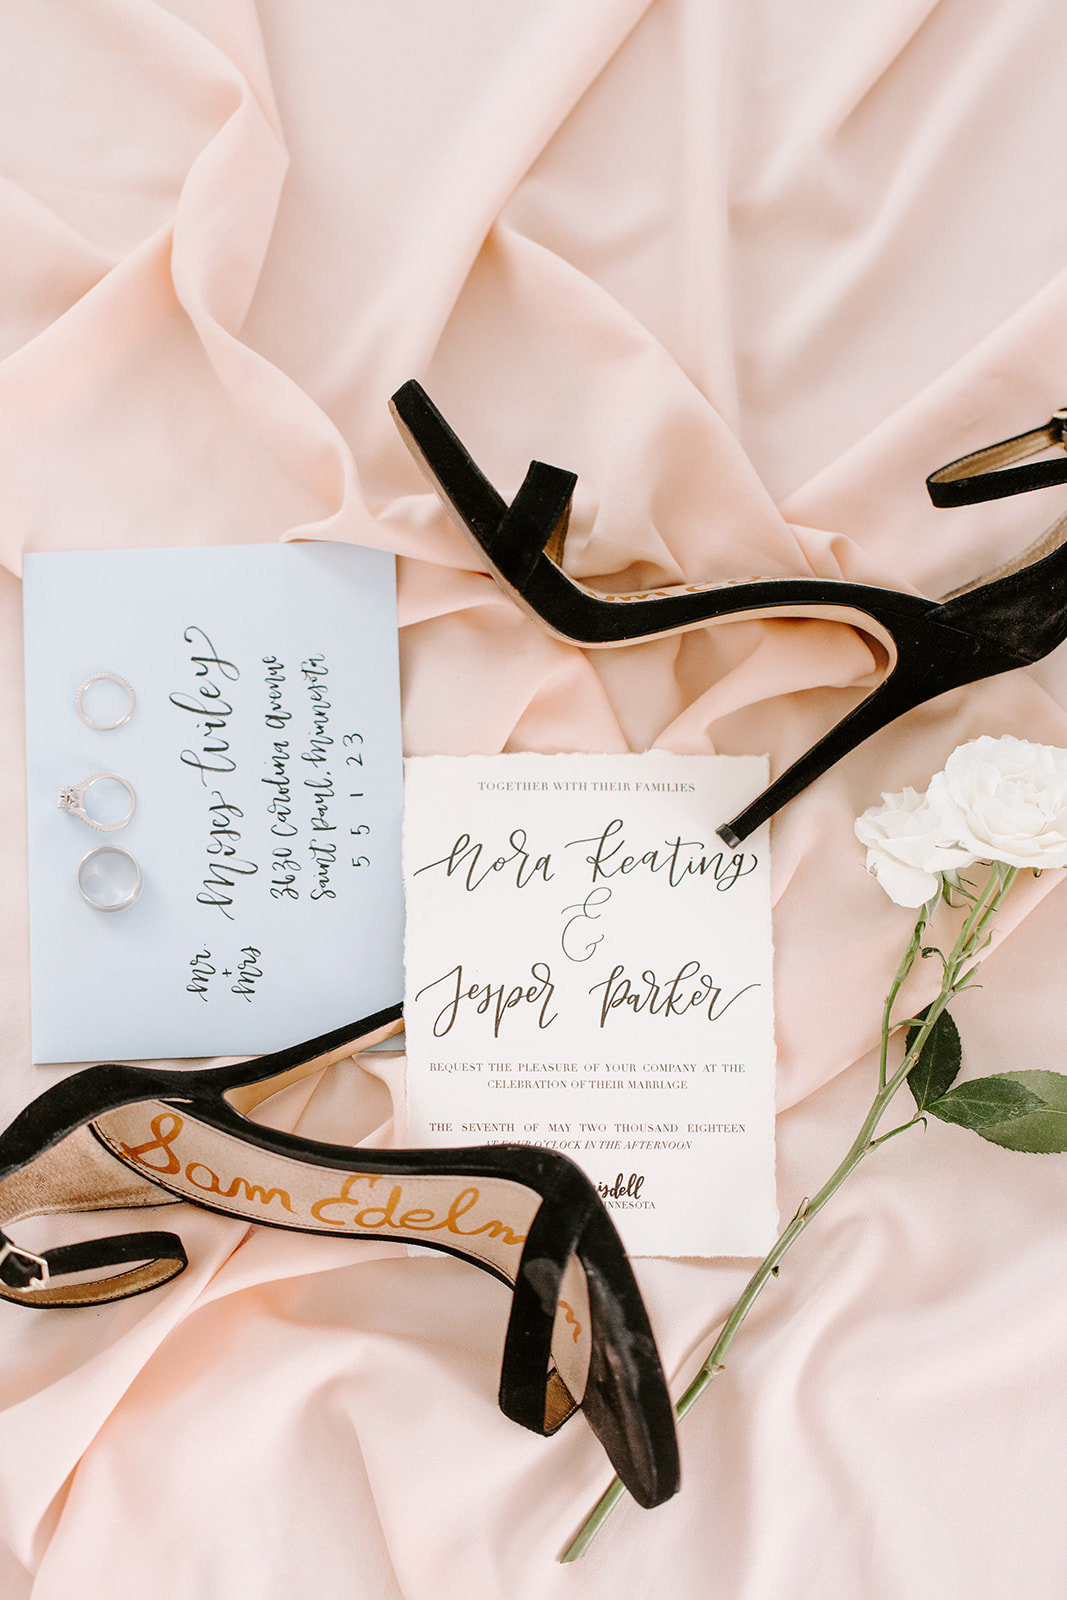 Minneapolis wedding invitation suite with shoes